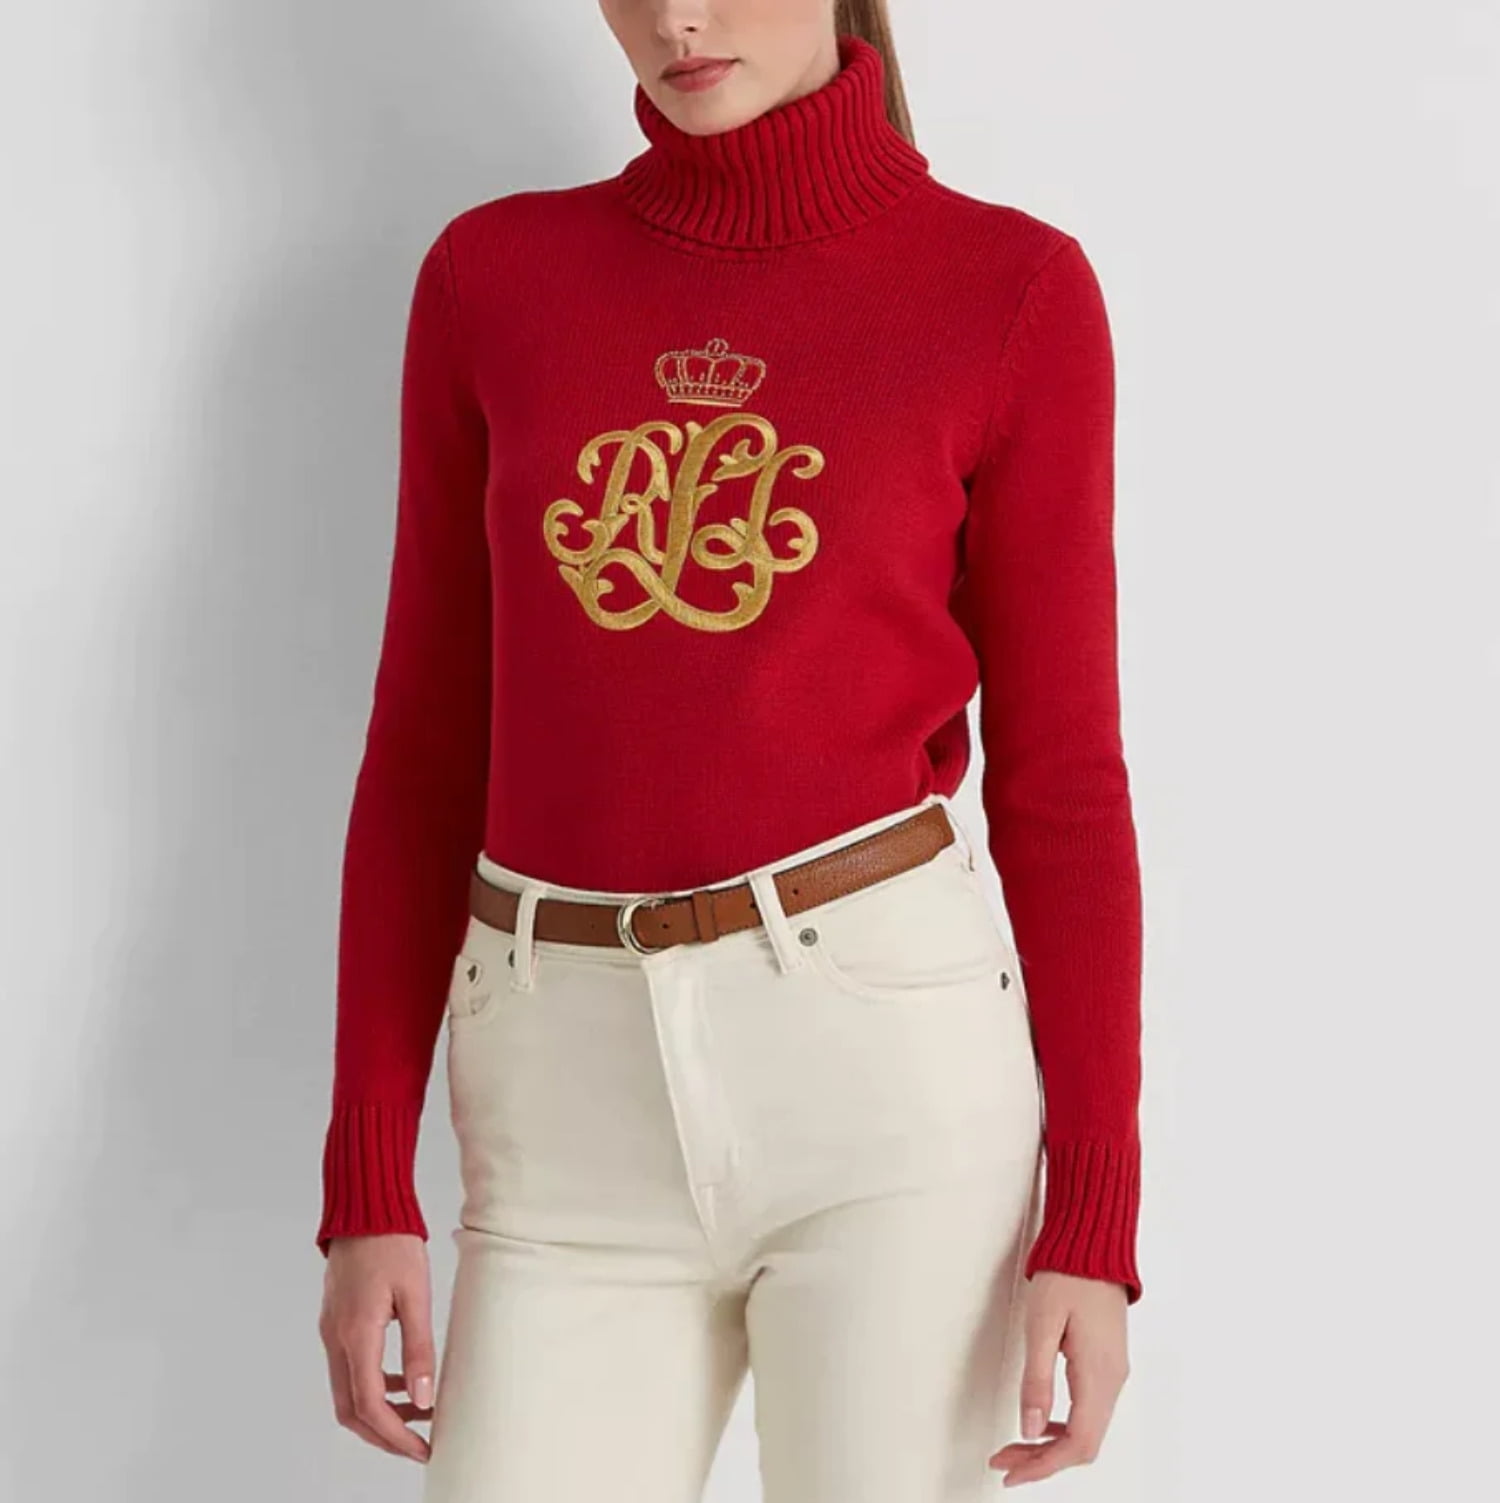 Ralph Lauren Red Ribbed Turtleneck Sweater New With Tags Womens Size Medium  Logo